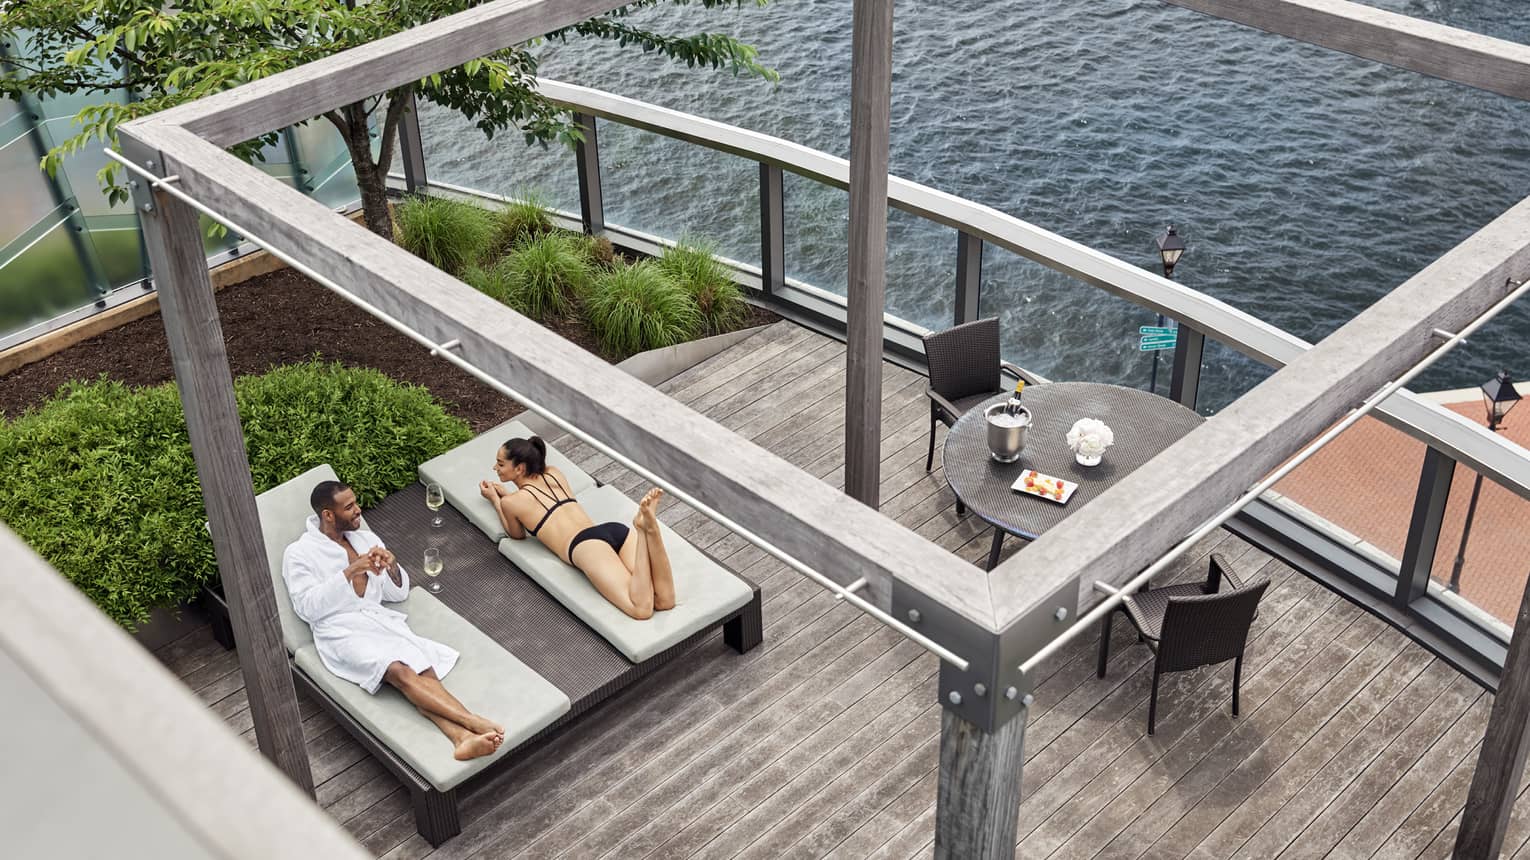 Couple laying on lounge chairs on wooden outdoor decking, table and chairs beside water